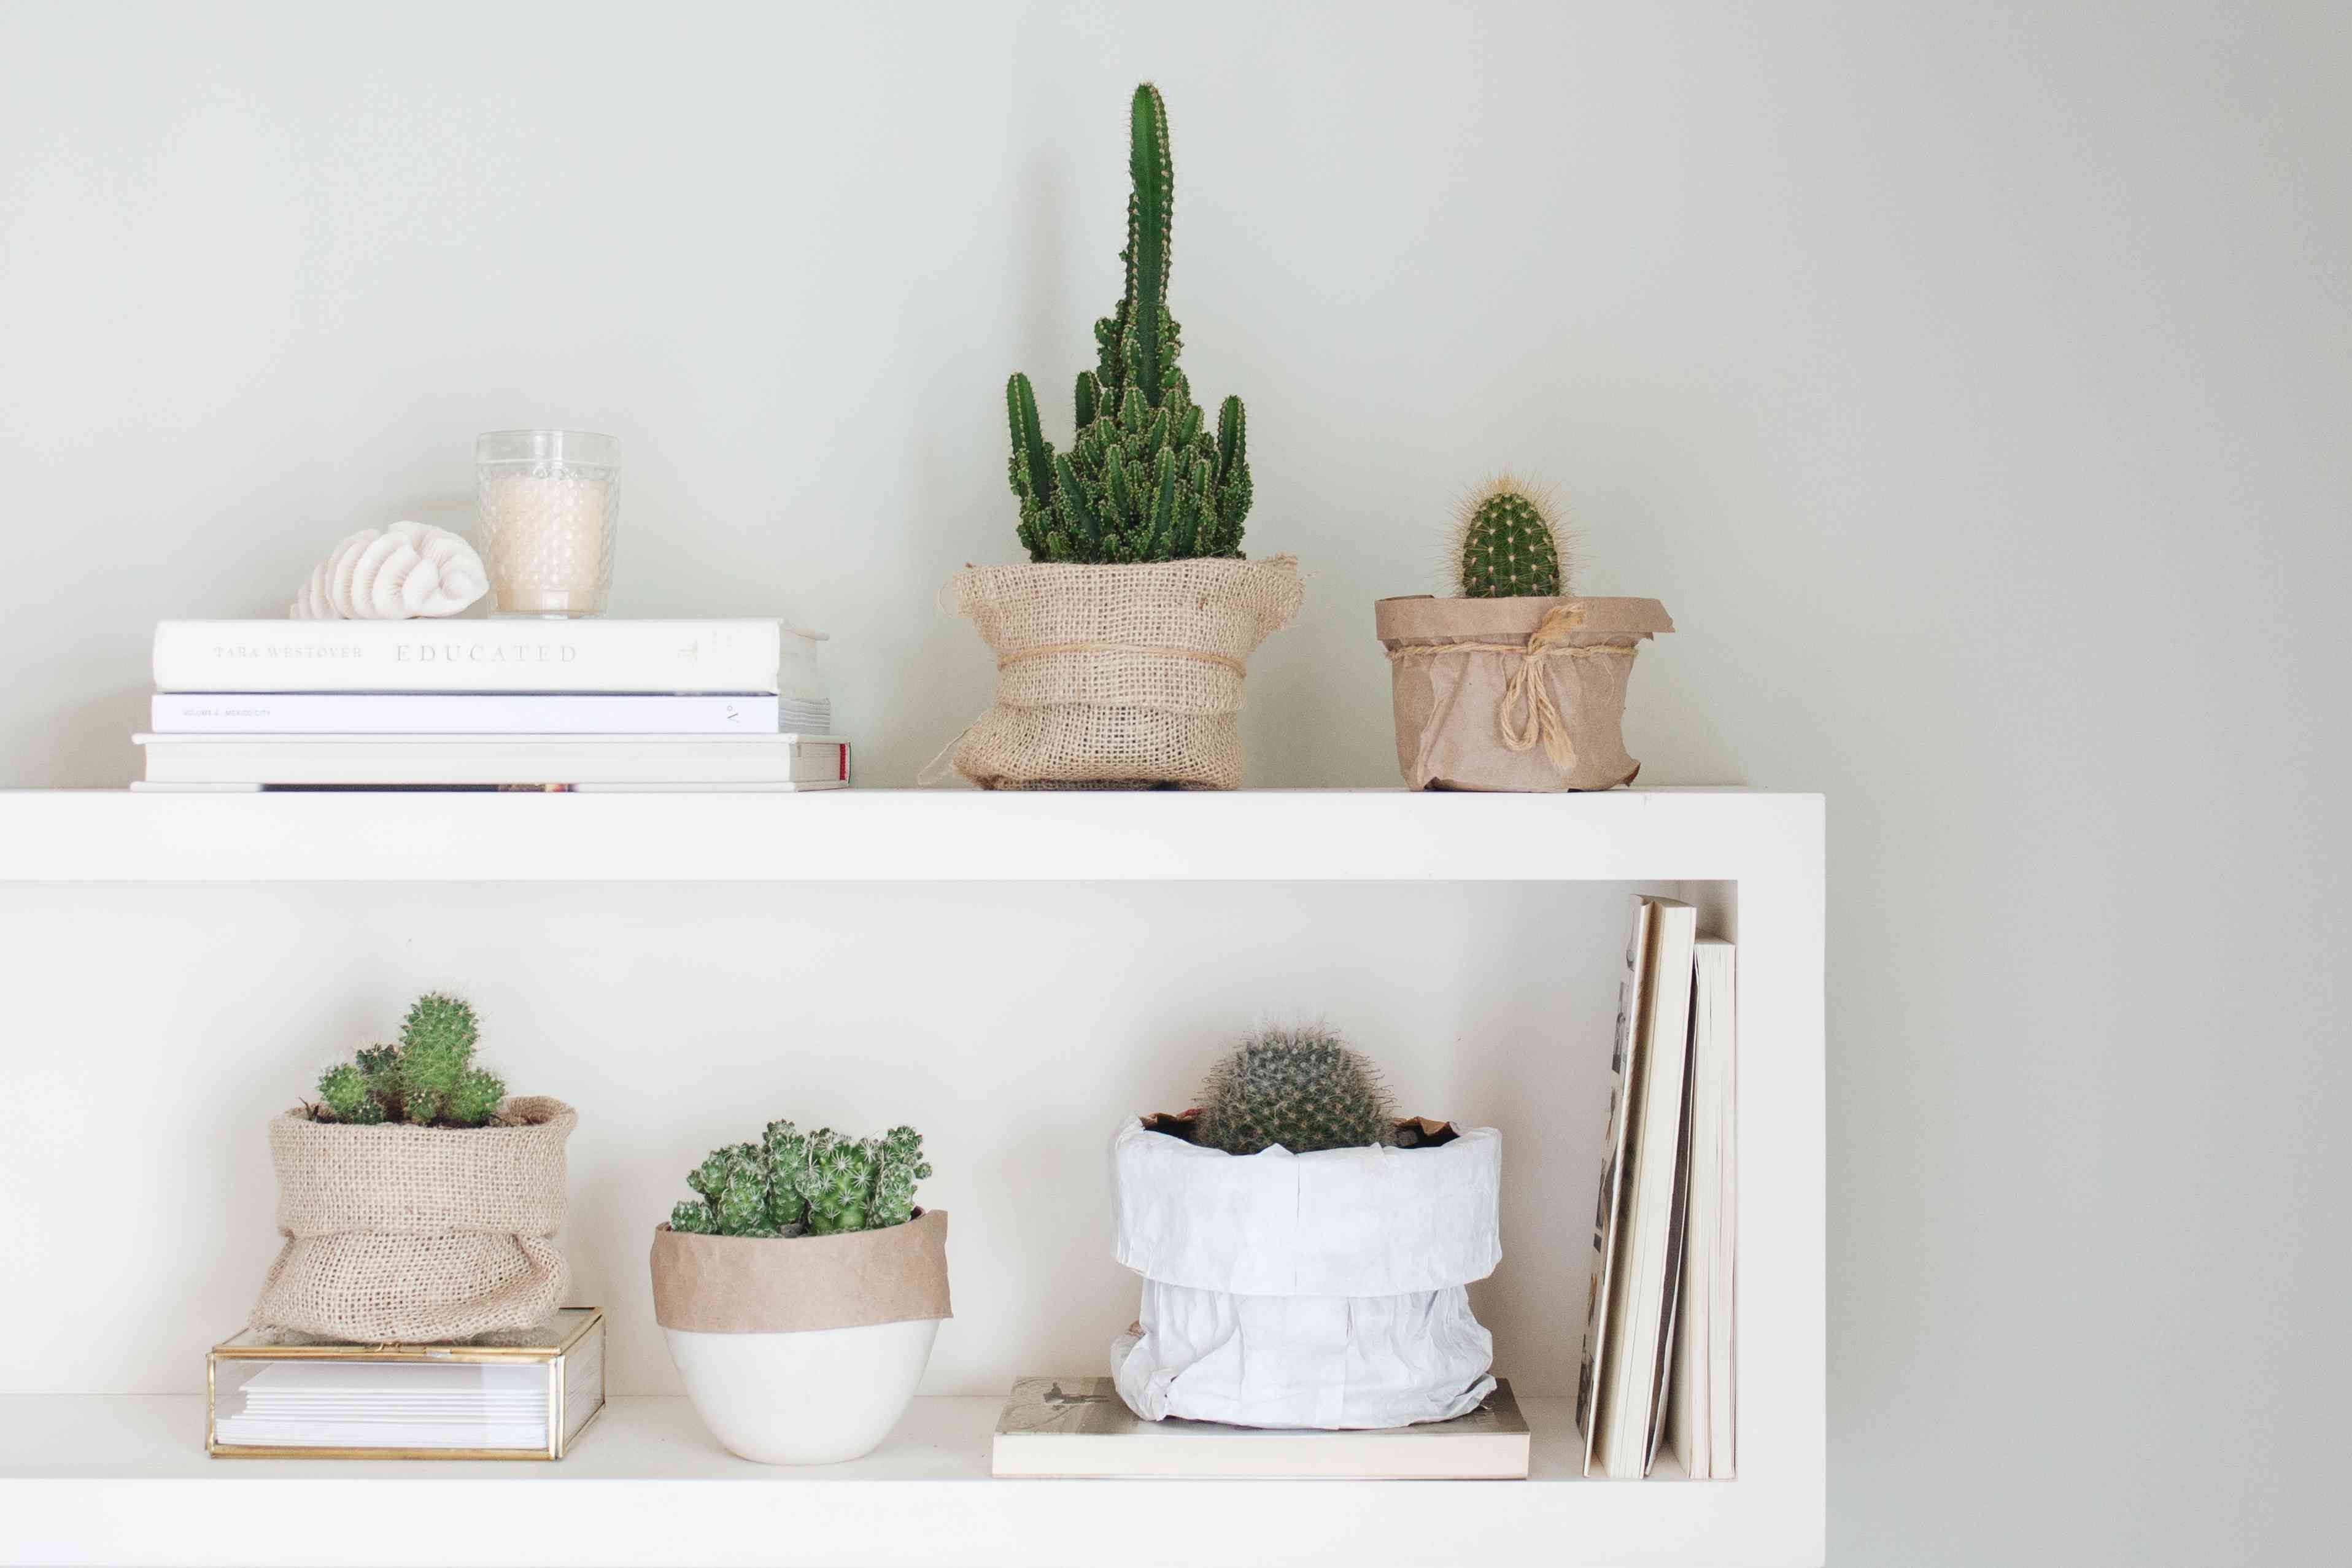 How to grow and care for indoor cactus